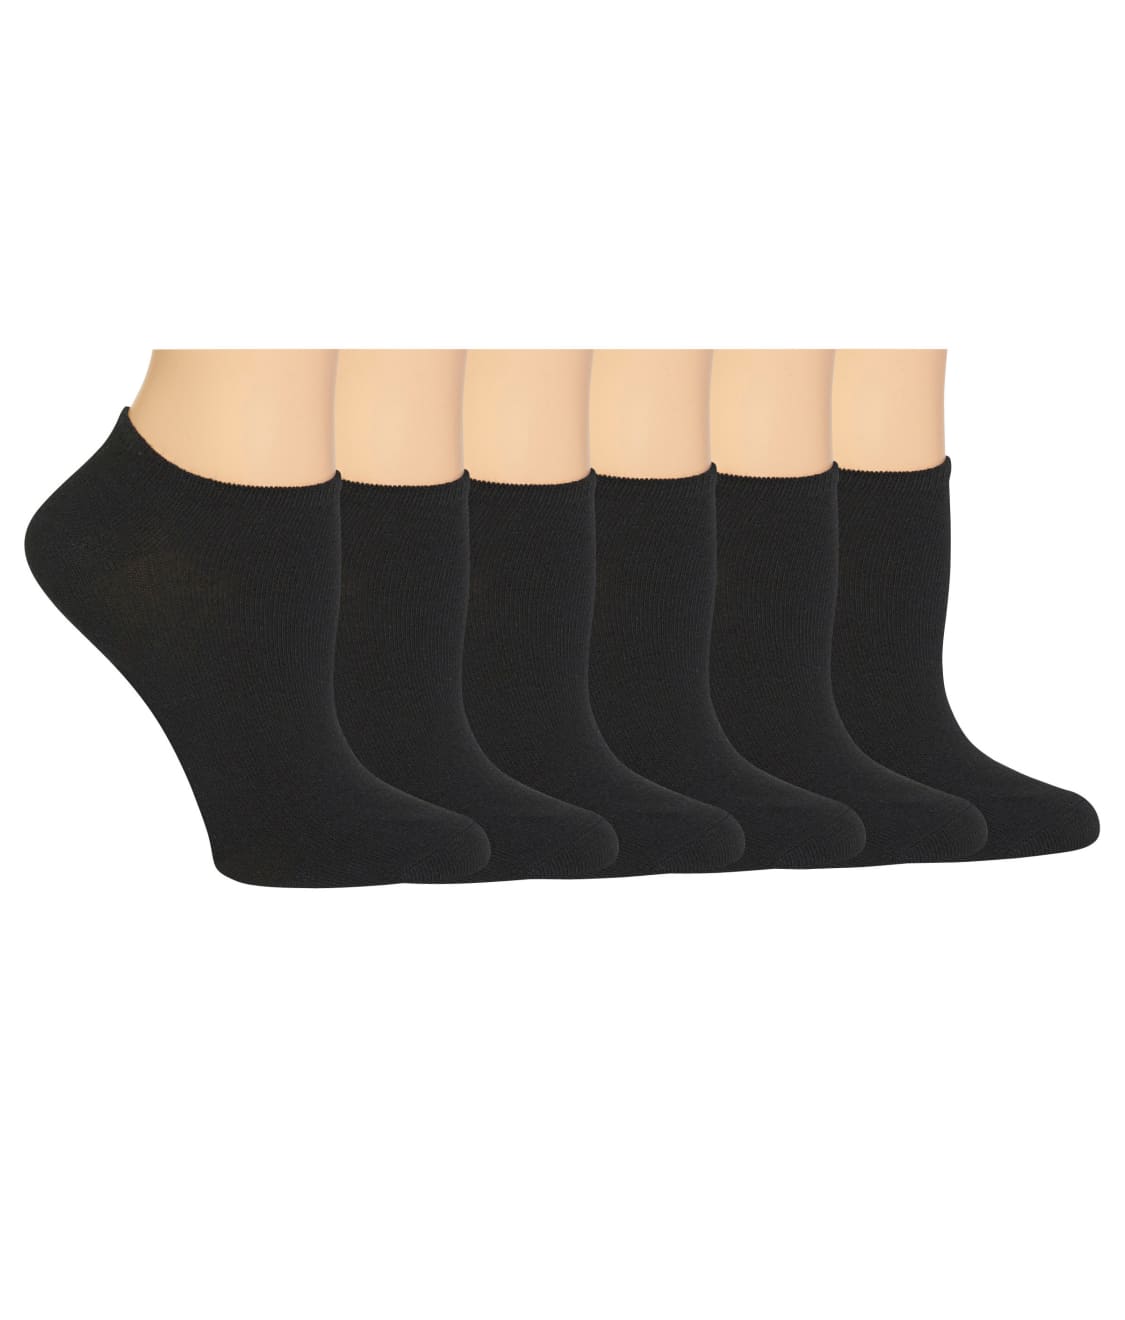 Hot Sox Low-Cut Socks 6-Pack & Reviews | Bare Necessities (Style ...